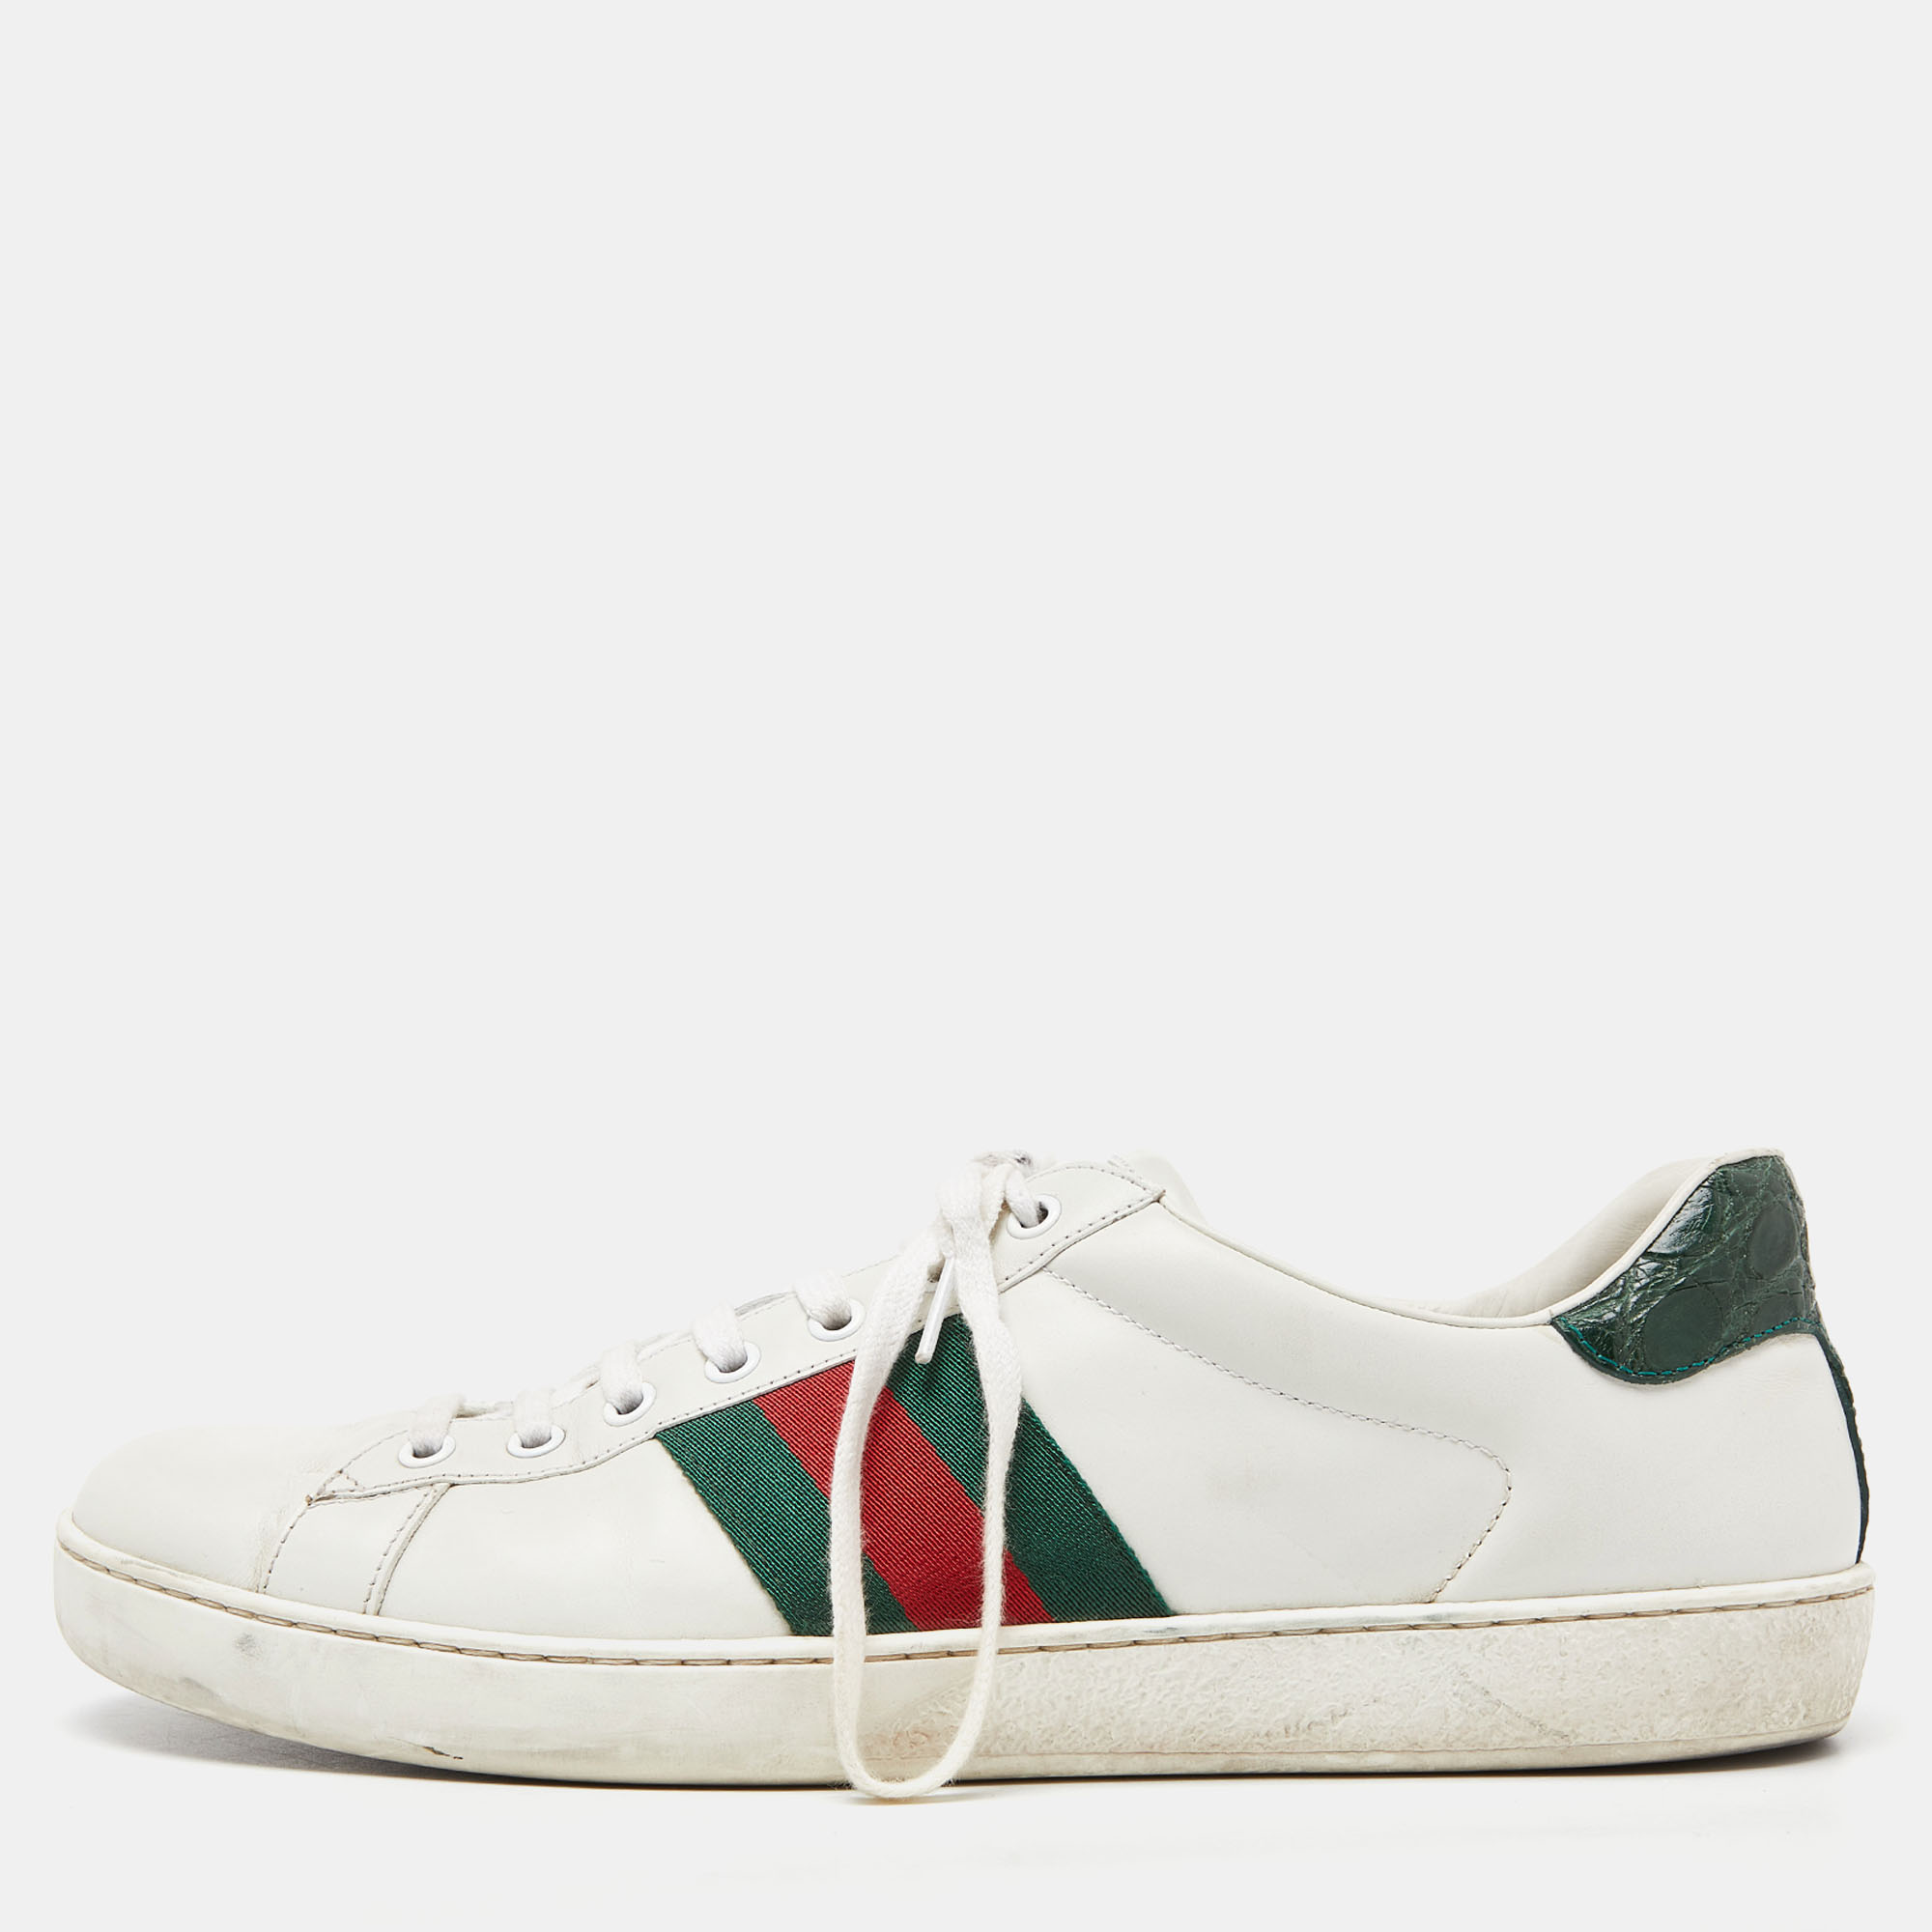 Pre-owned Gucci White Leather Ace Low Top Sneakers Size 44